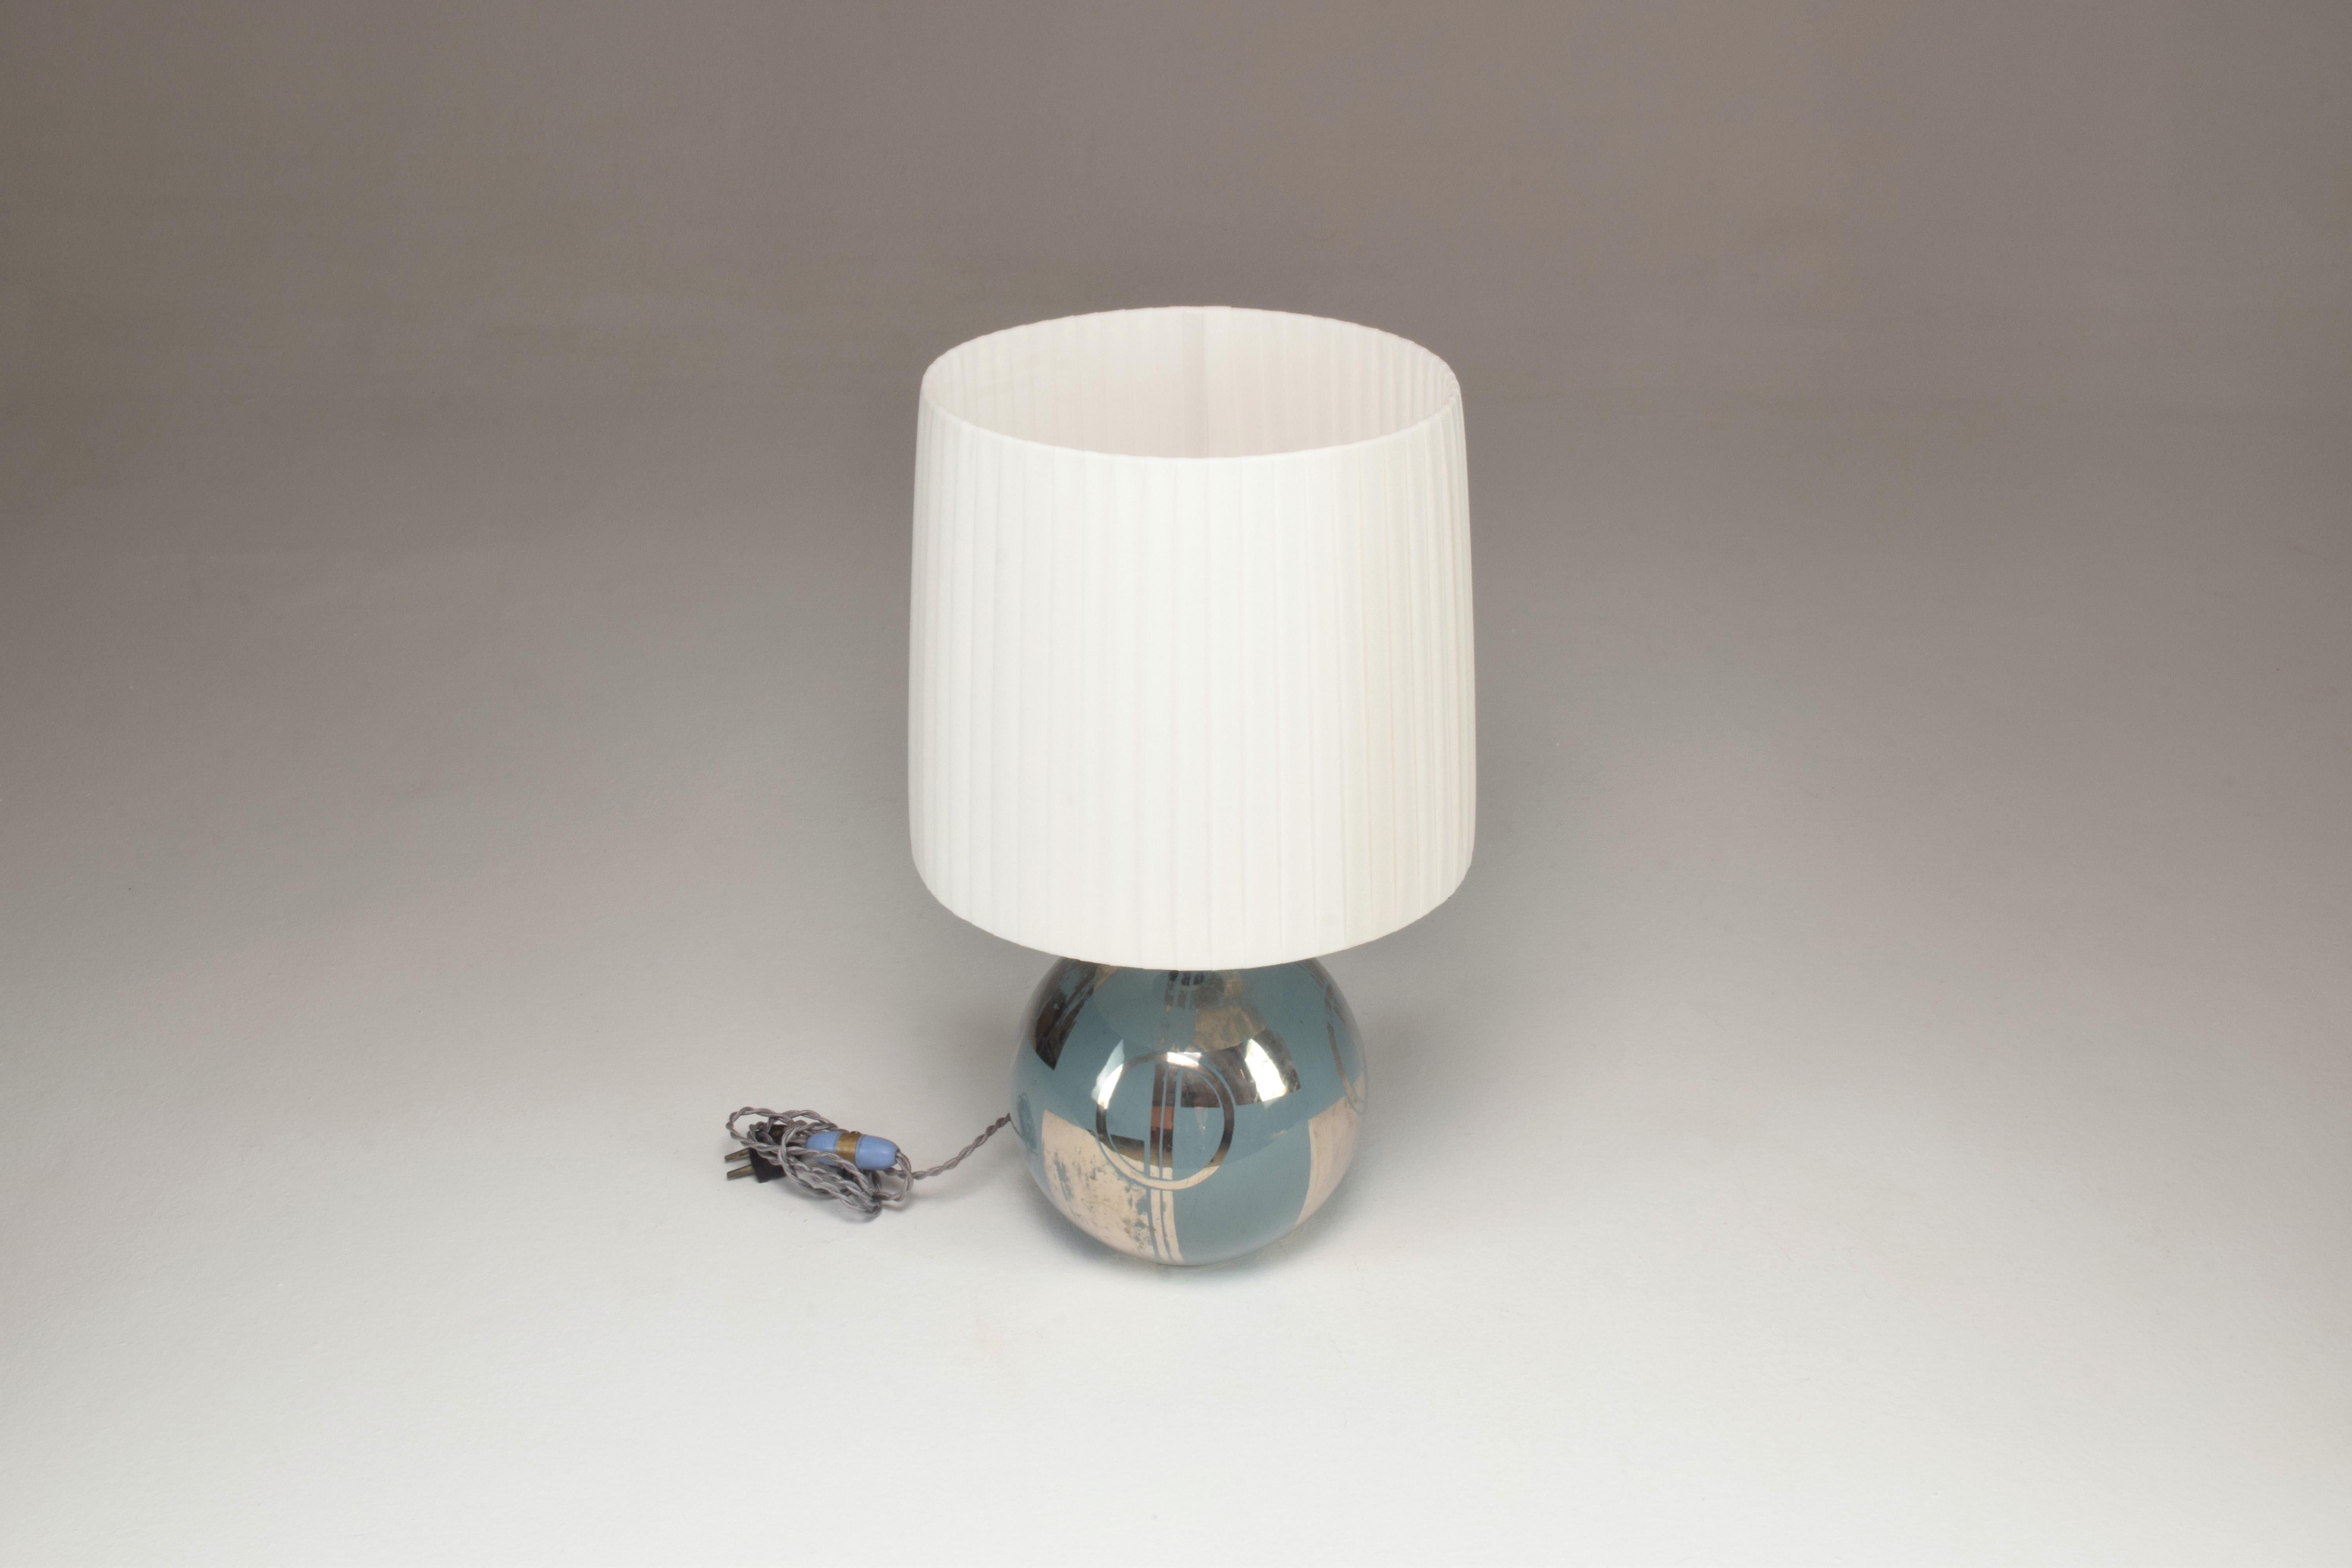 It is a highly original early 20th-century vintage round table lamp that stands out with its handpainted geometric light blue and silver faded lines and squares. 
Restored with a new shade, original switch,
France, Circa 1930's 

We are an